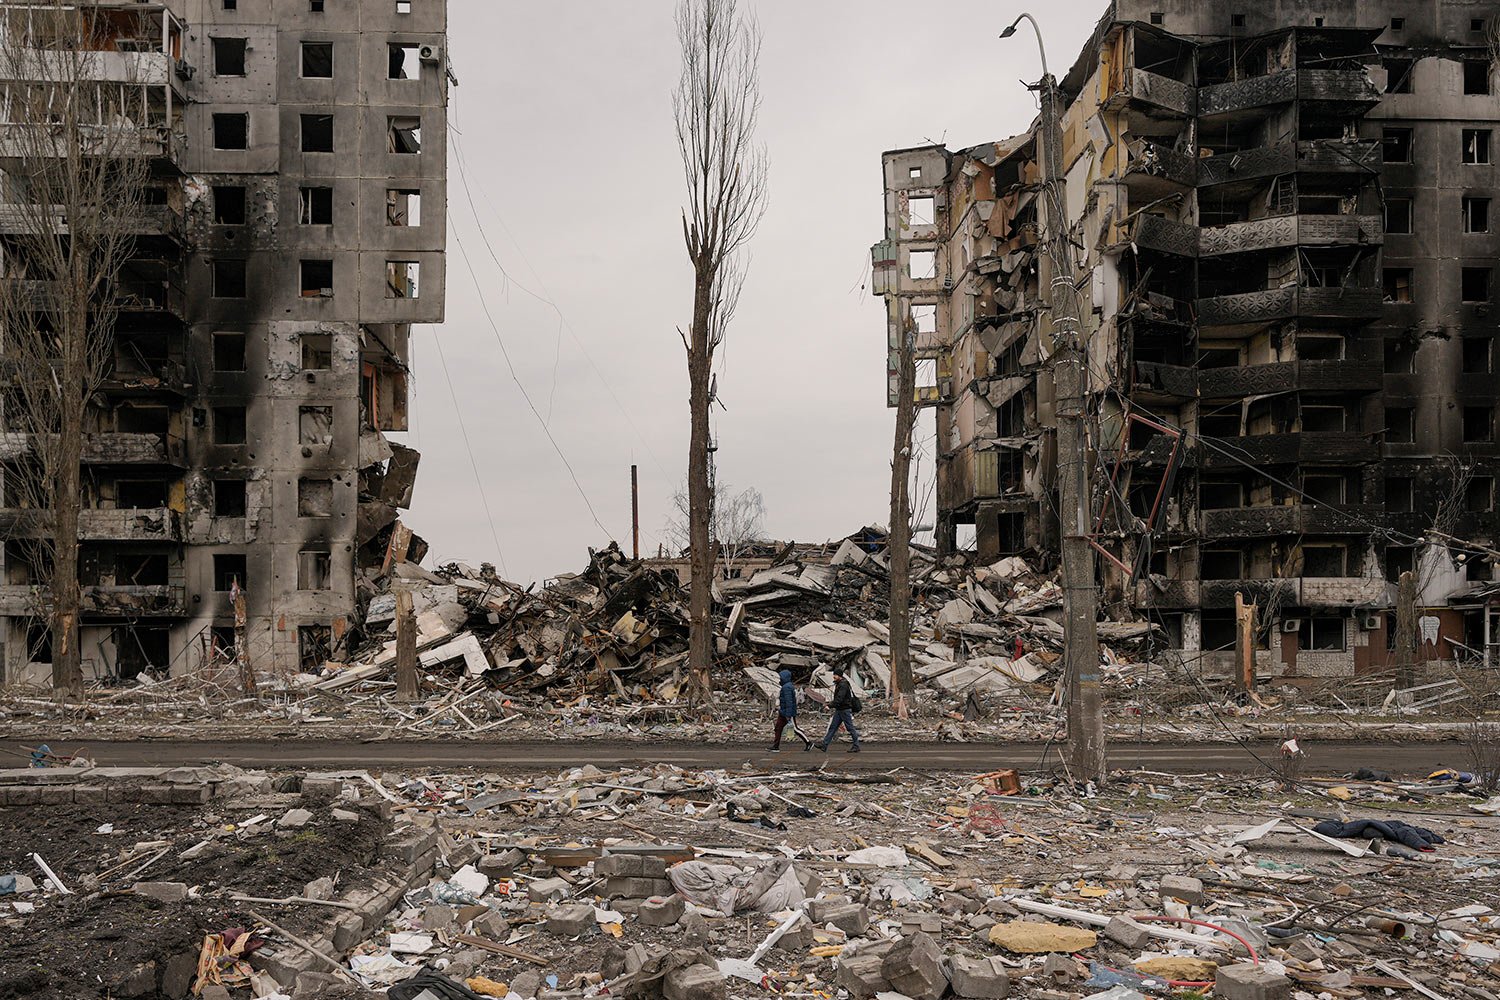  People walk by an apartment building destroyed during fighting between Ukrainian and Russian forces in Borodyanka, Ukraine, Tuesday, April 5, 2022. (AP Photo/Vadim Ghirda) 